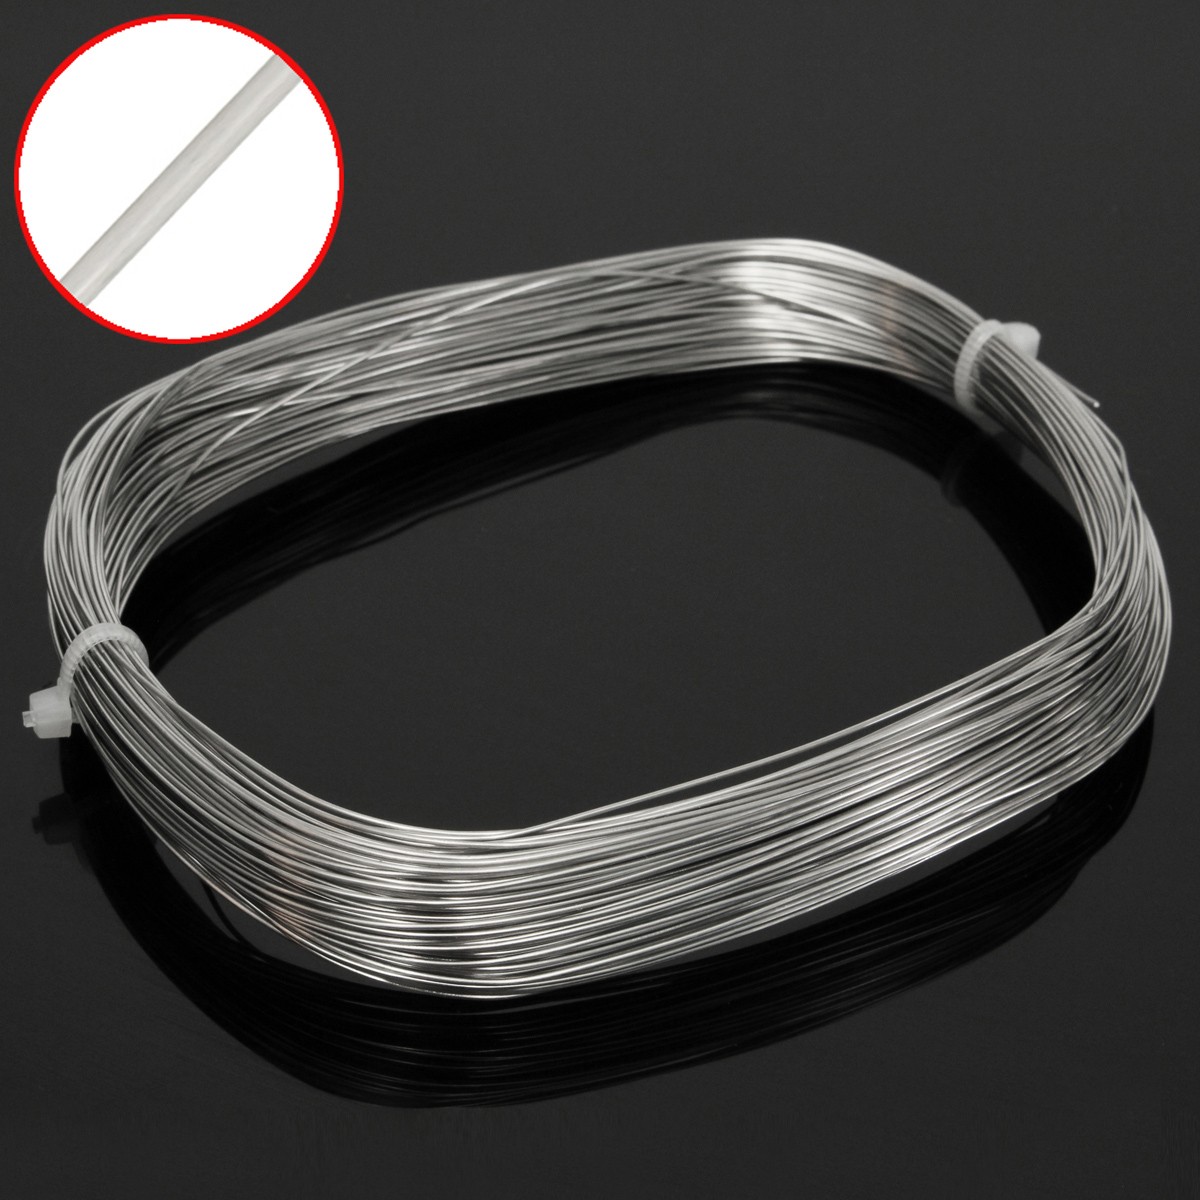 30M x 0.6mm 304 Stainless Steel Wire Rope Tensile Soft Structure Cable Fishing Lifting Cable Clothesline